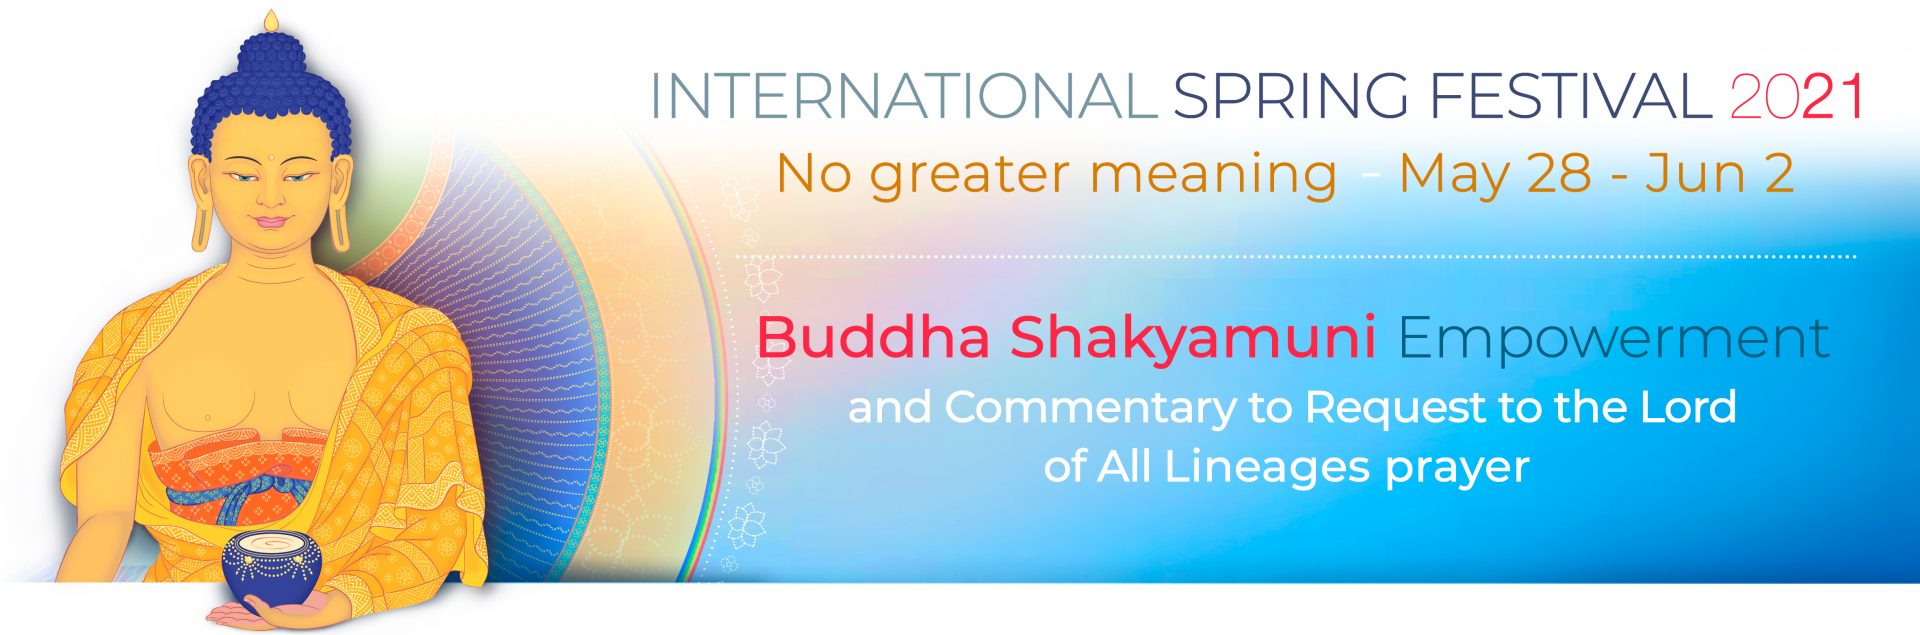 Why I am attending the Spring Festival Kadampa Buddhism